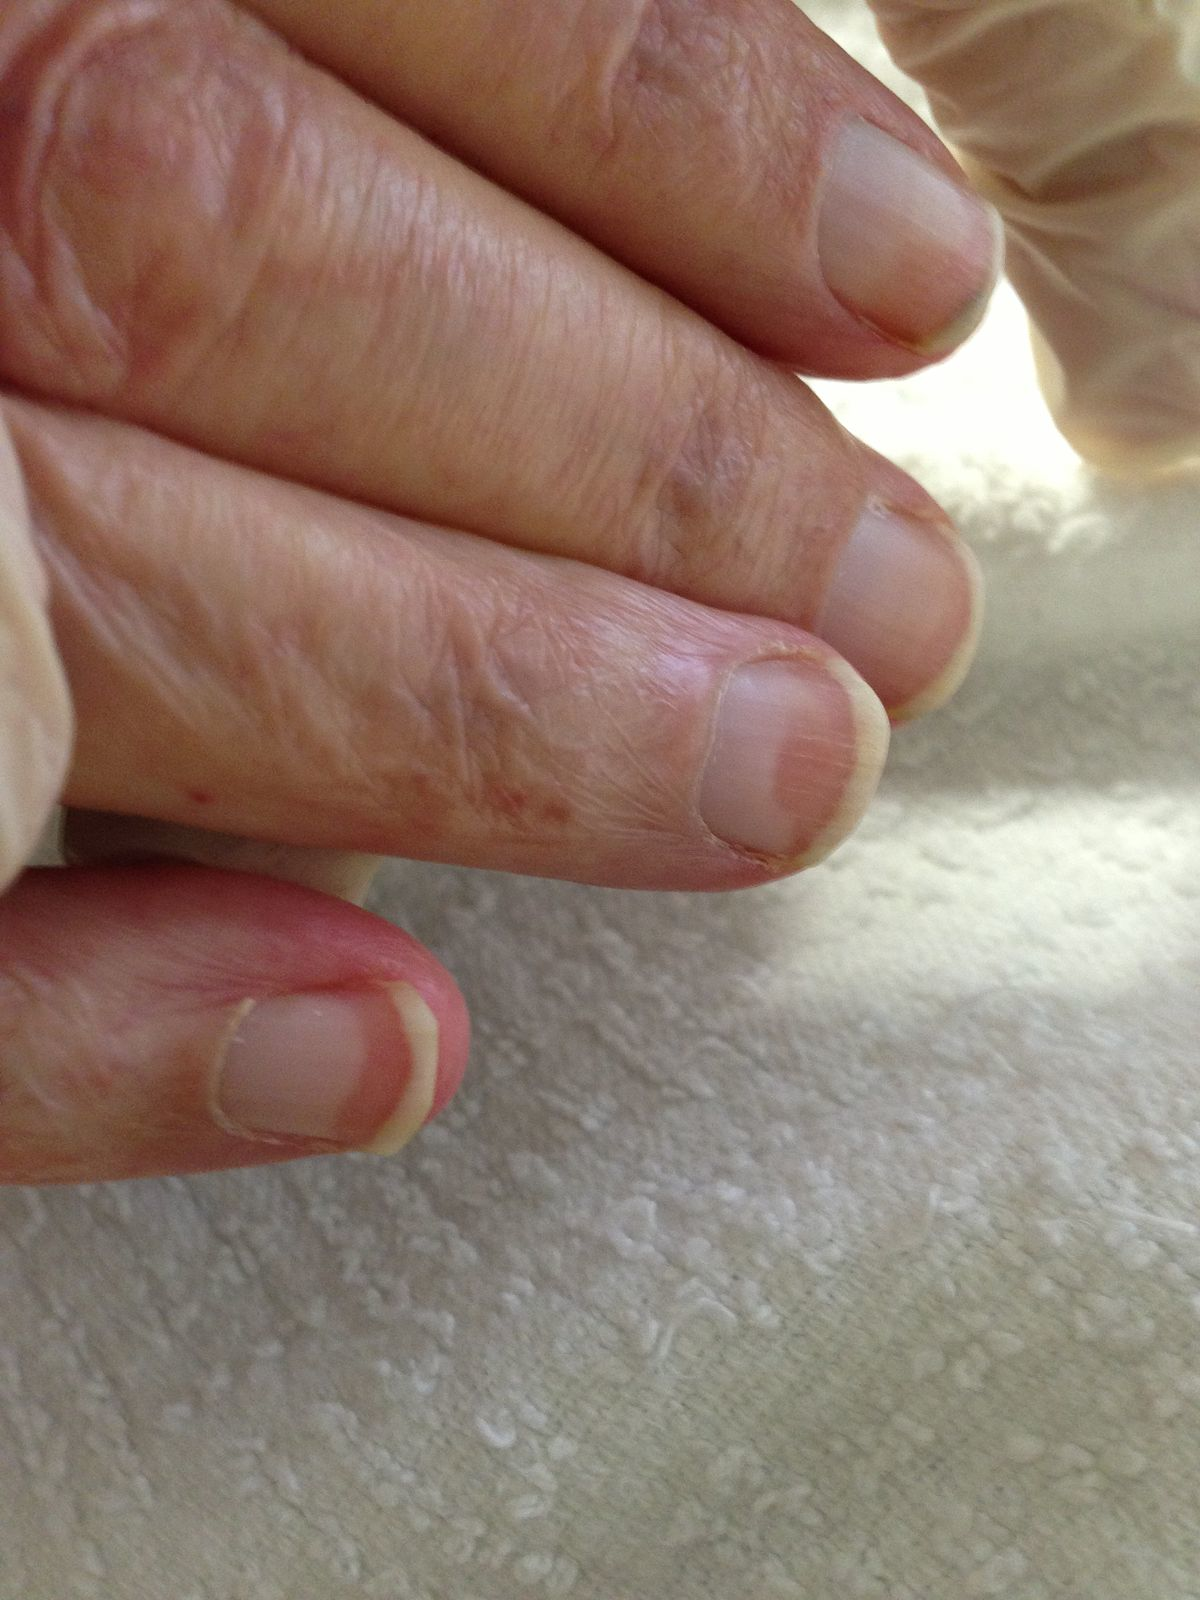 Doctors Warn These 4 Fingernail Issues Could Mean Serious Health Problems